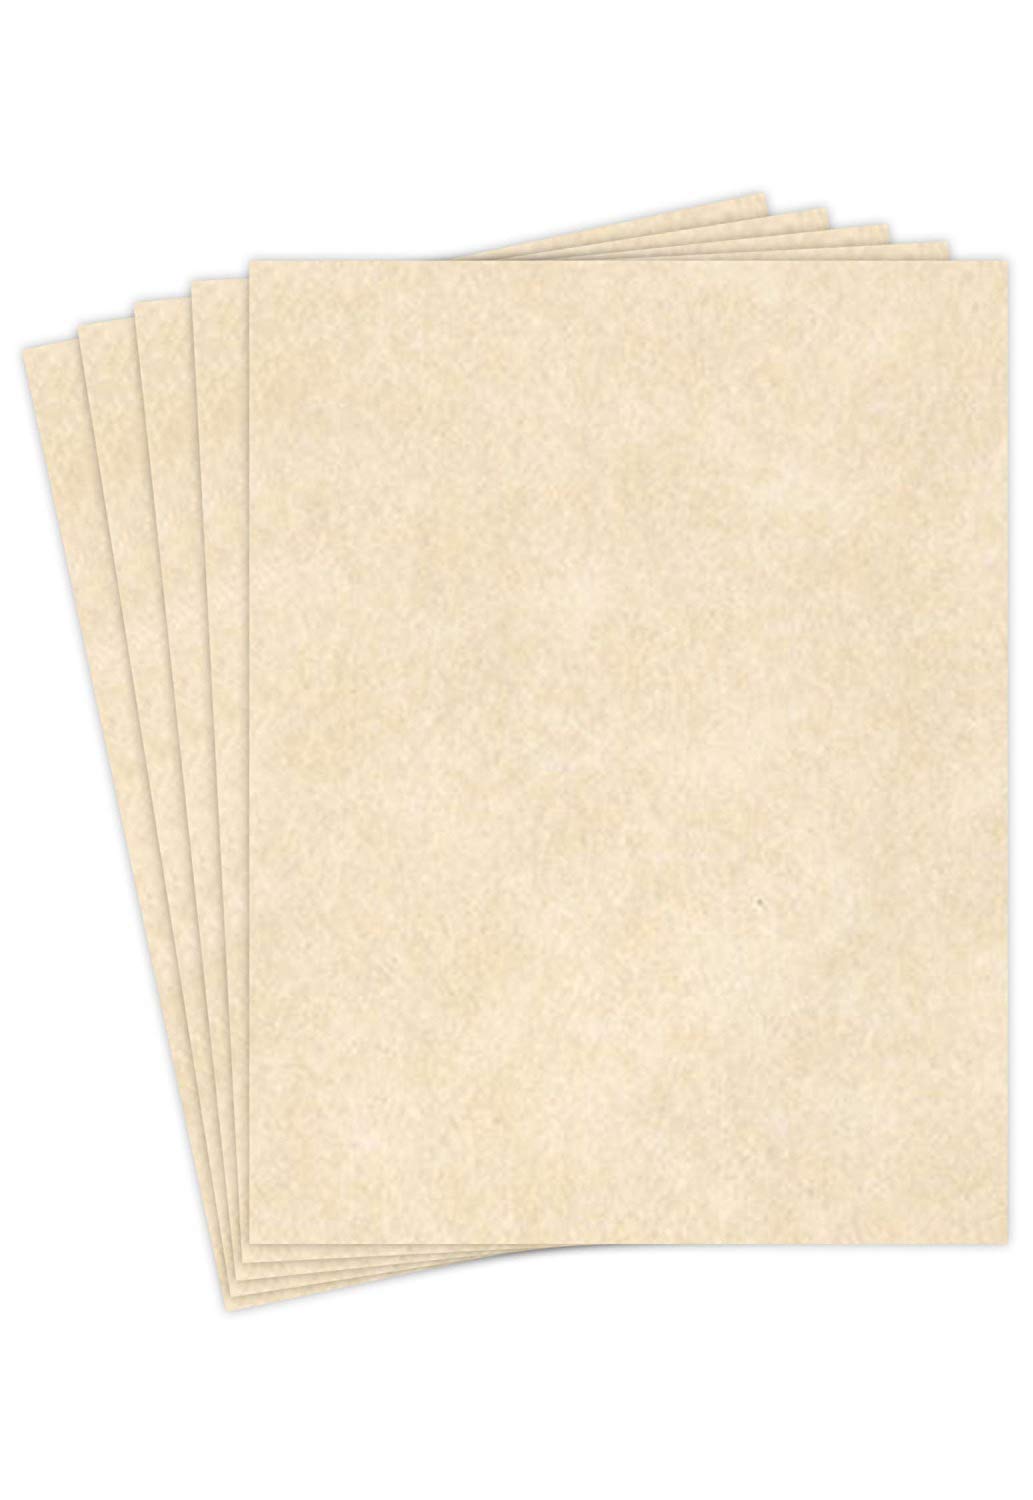 Natural Imitation Parchment Paper Great for Writing Certificates